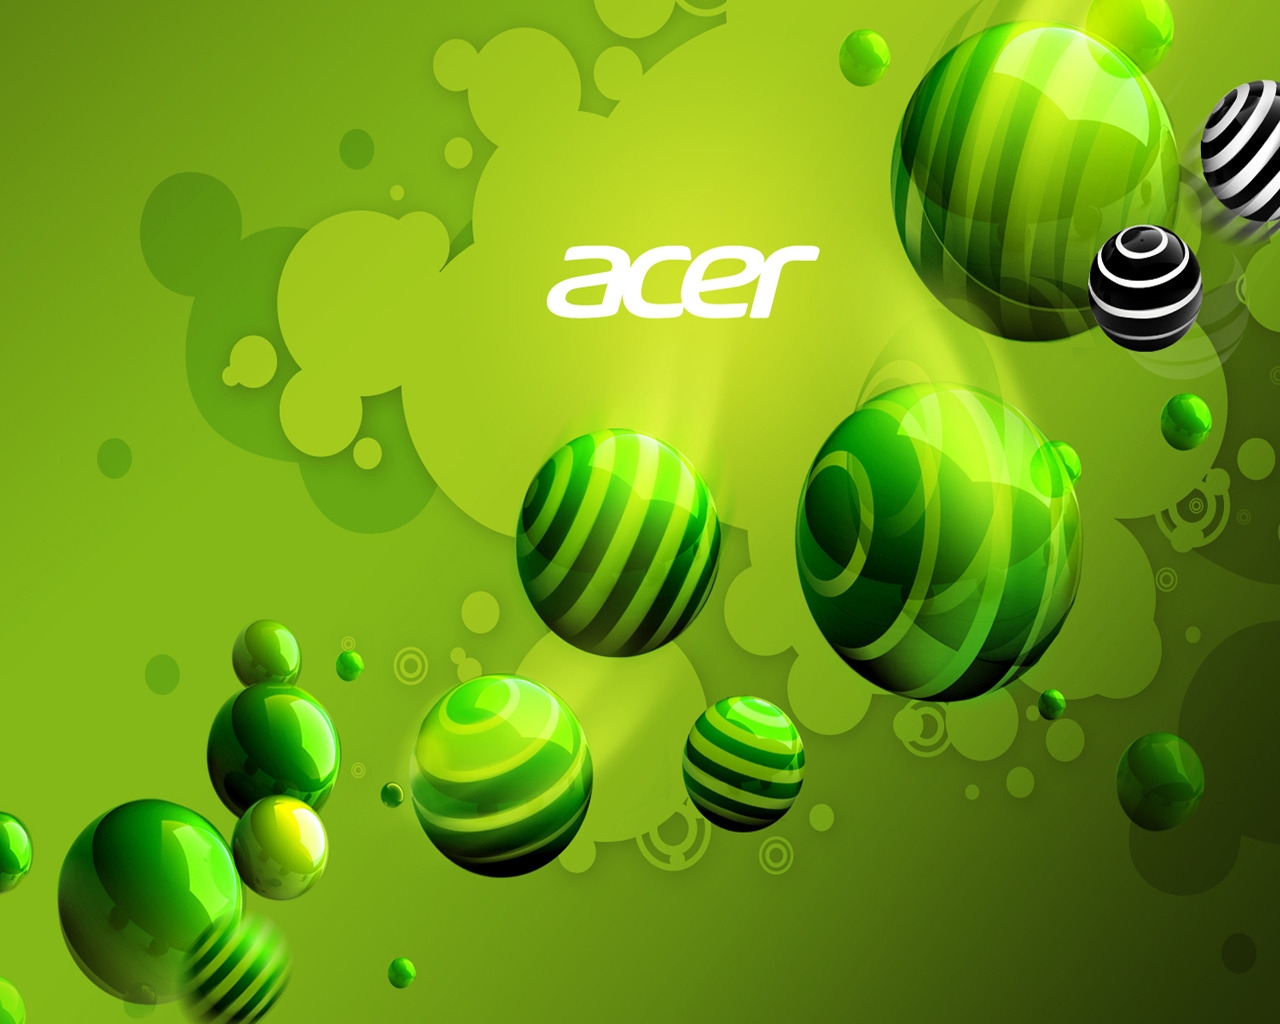 Acer Green World for 1280 x 1024 resolution